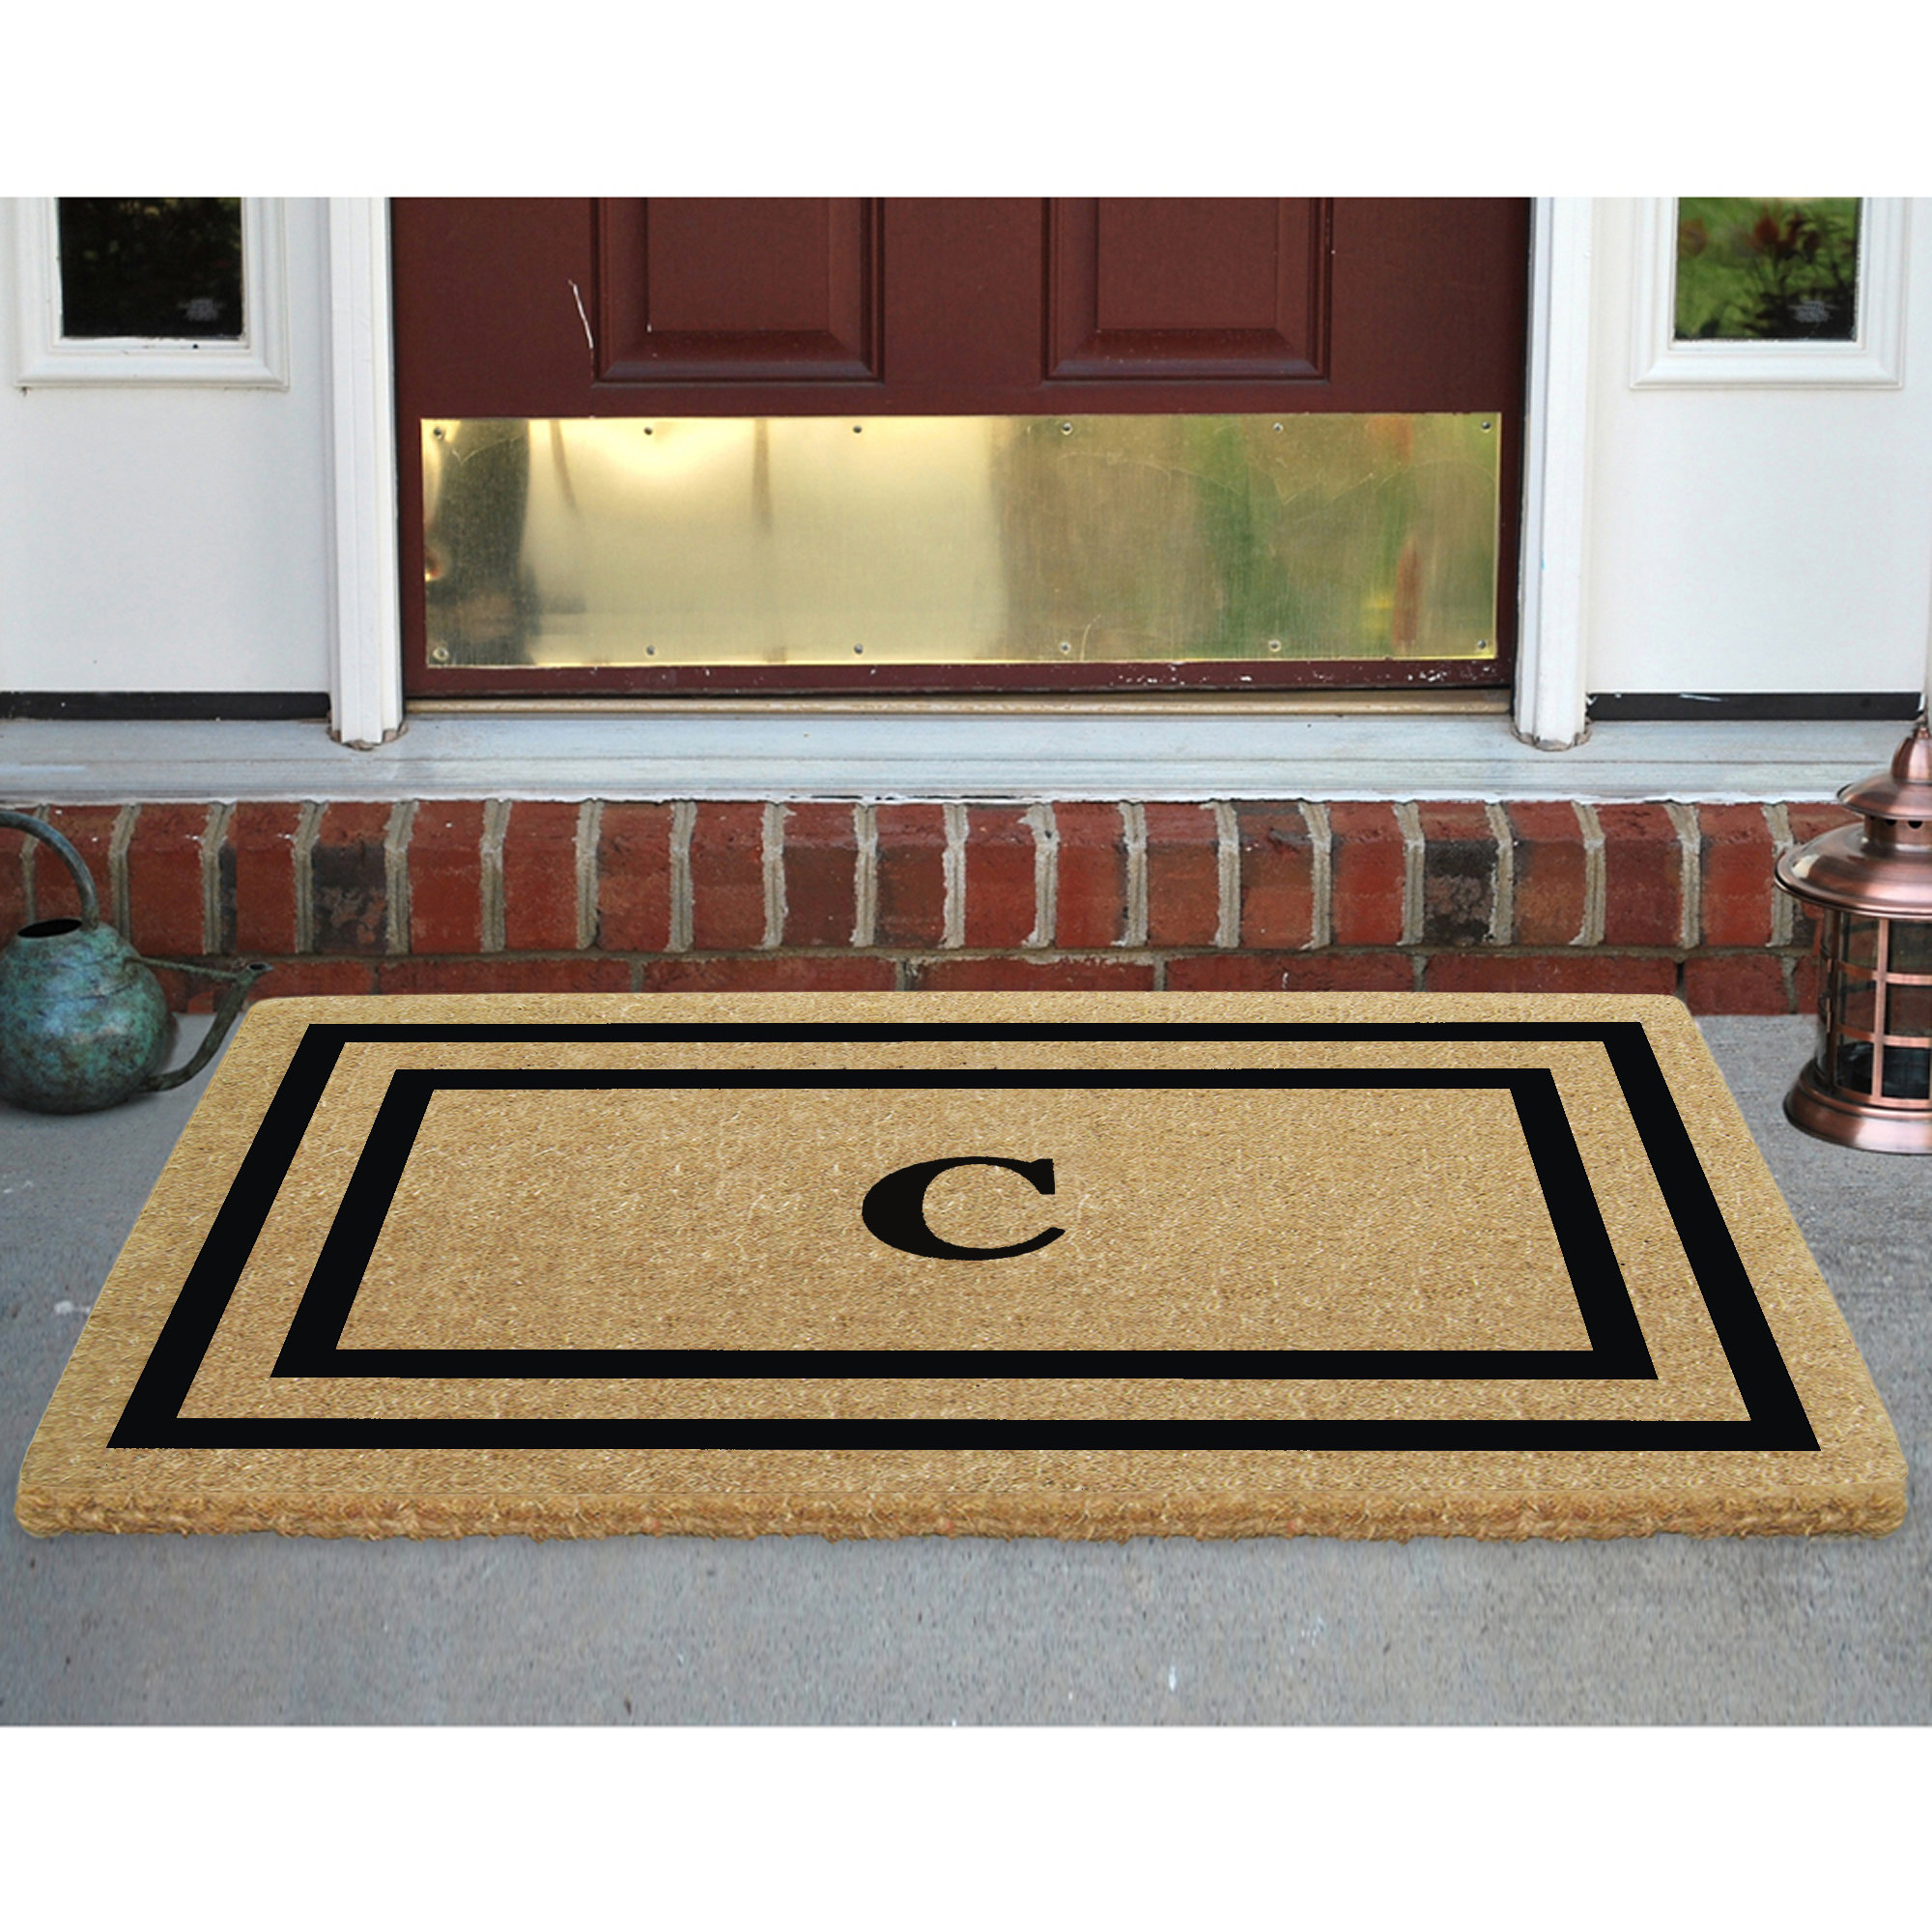 A1hc Rubber and Coir Falling Leaves Heavy Duty Durable Doormat 24 inchx48 inch, Beige, Size: 24 inch x 48 inch